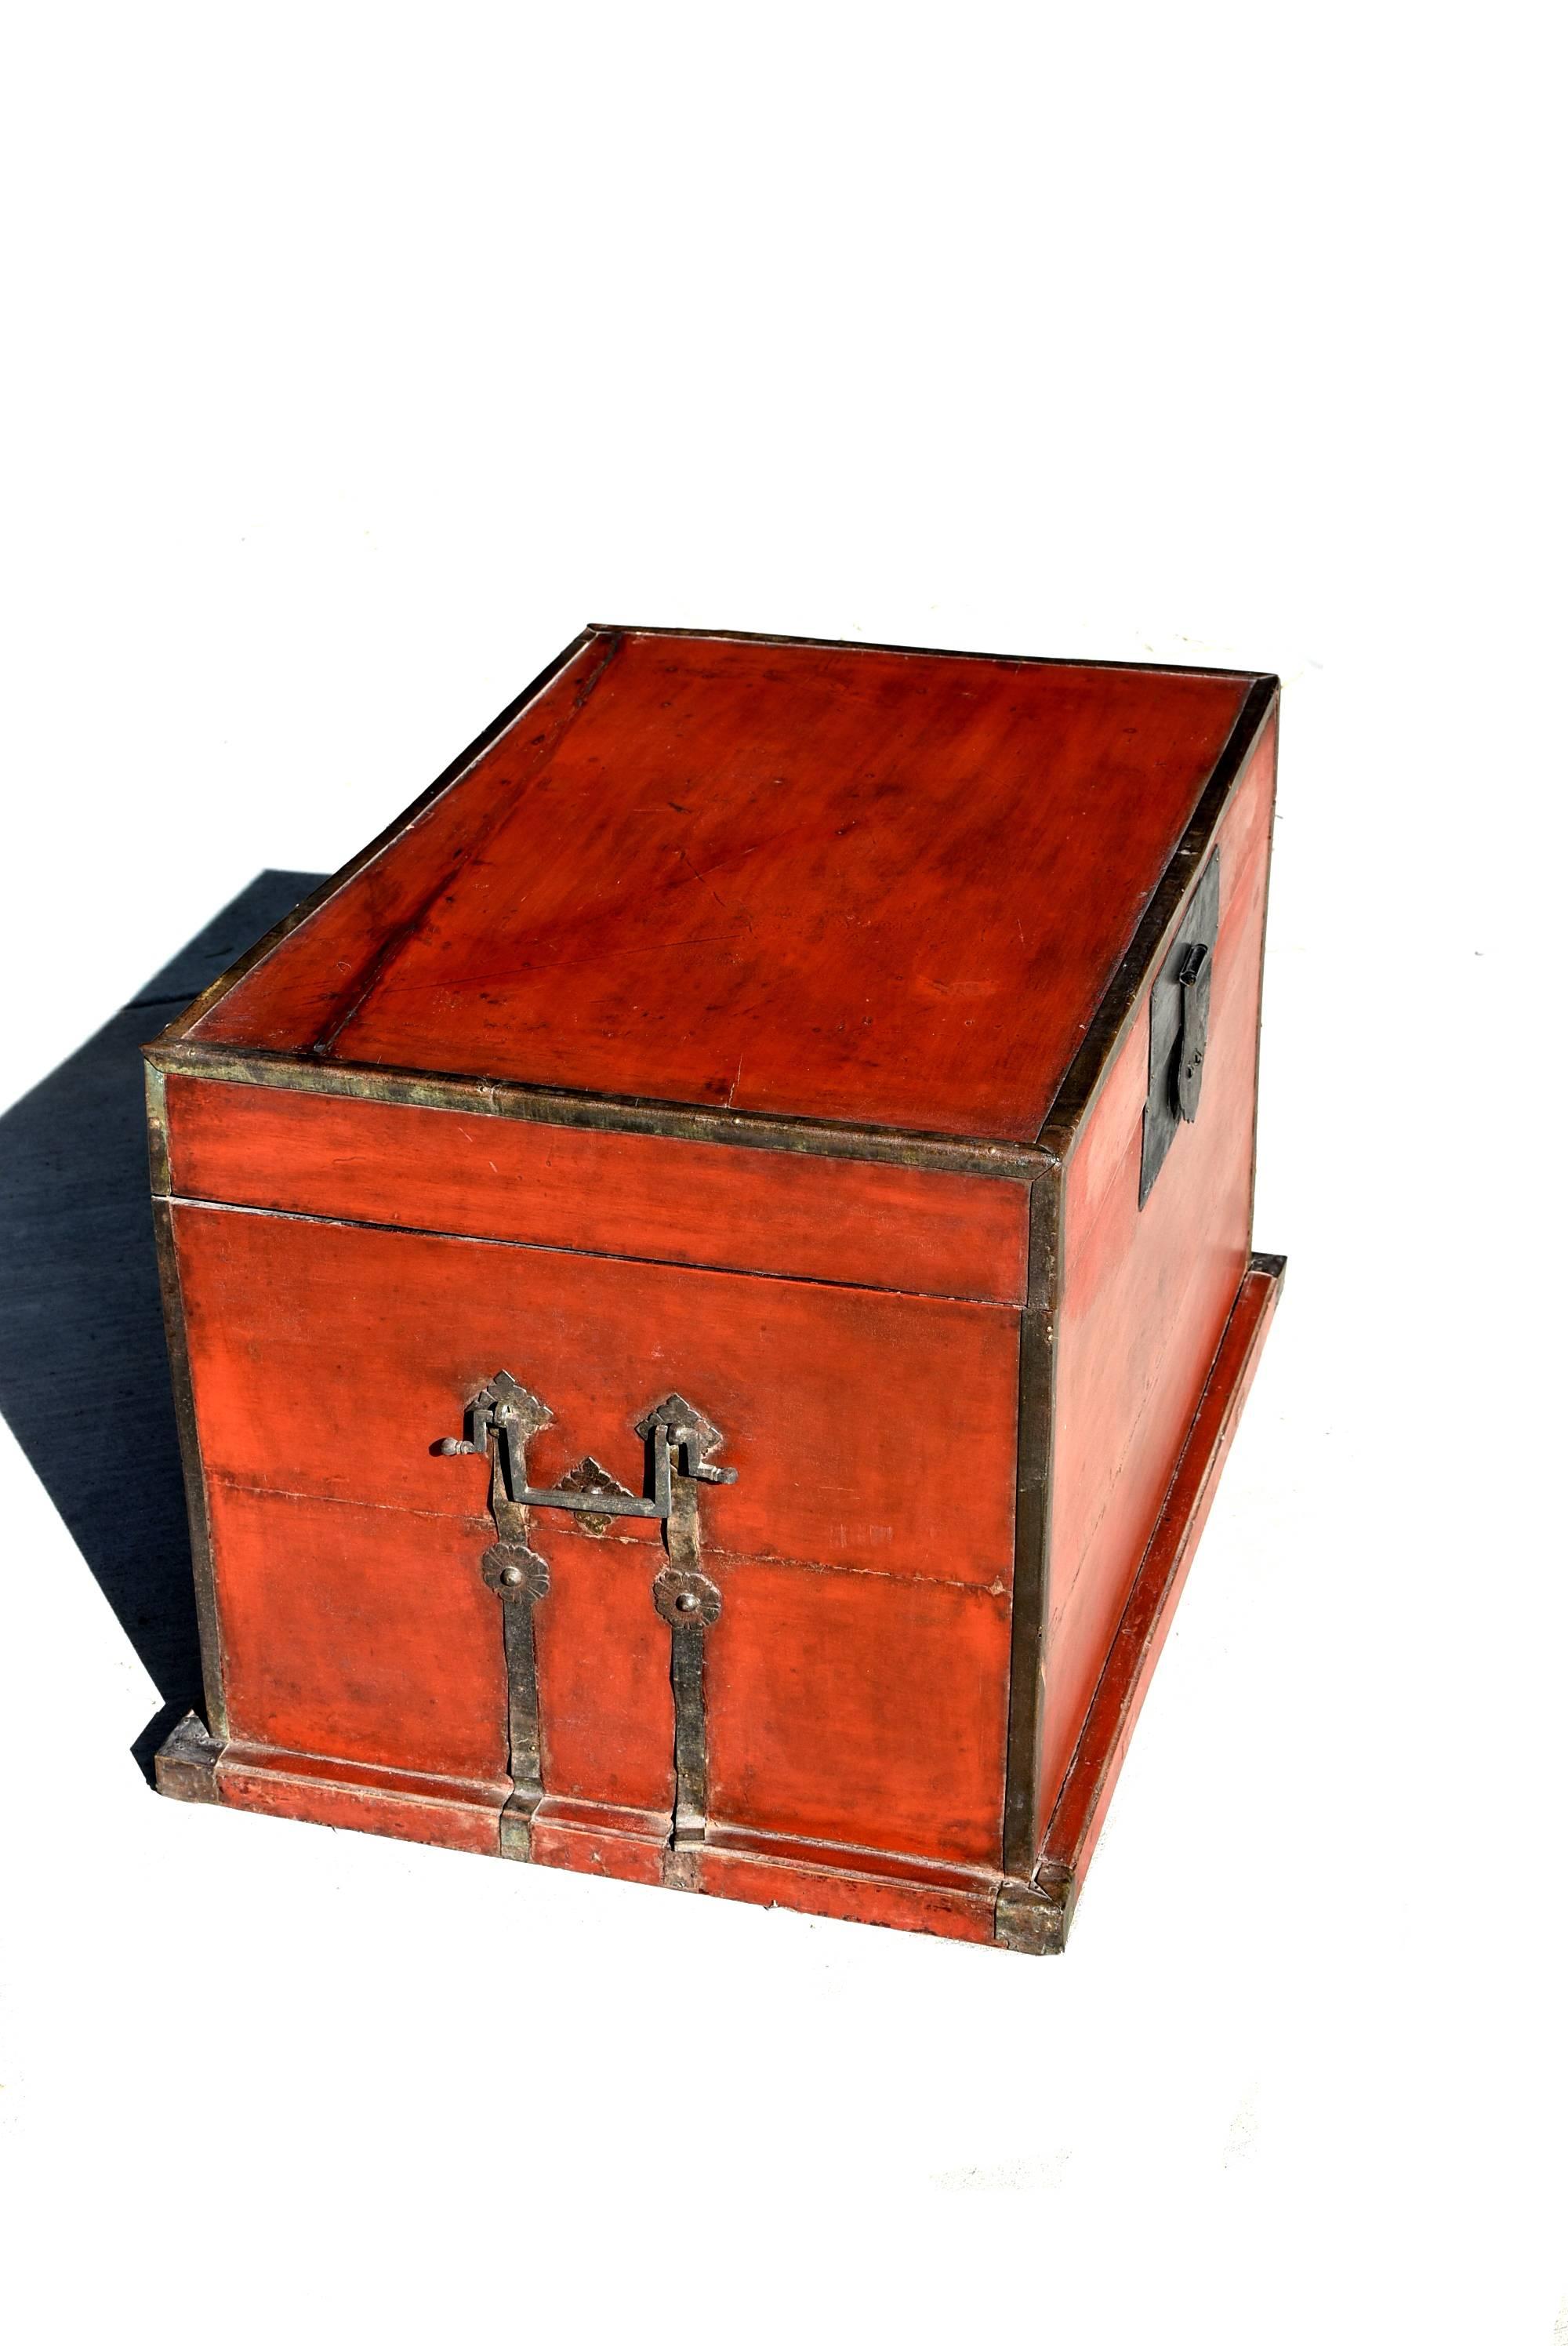 Hand-Crafted Antique Red Chinese Trunk, Blanket Chest with Original Hardware